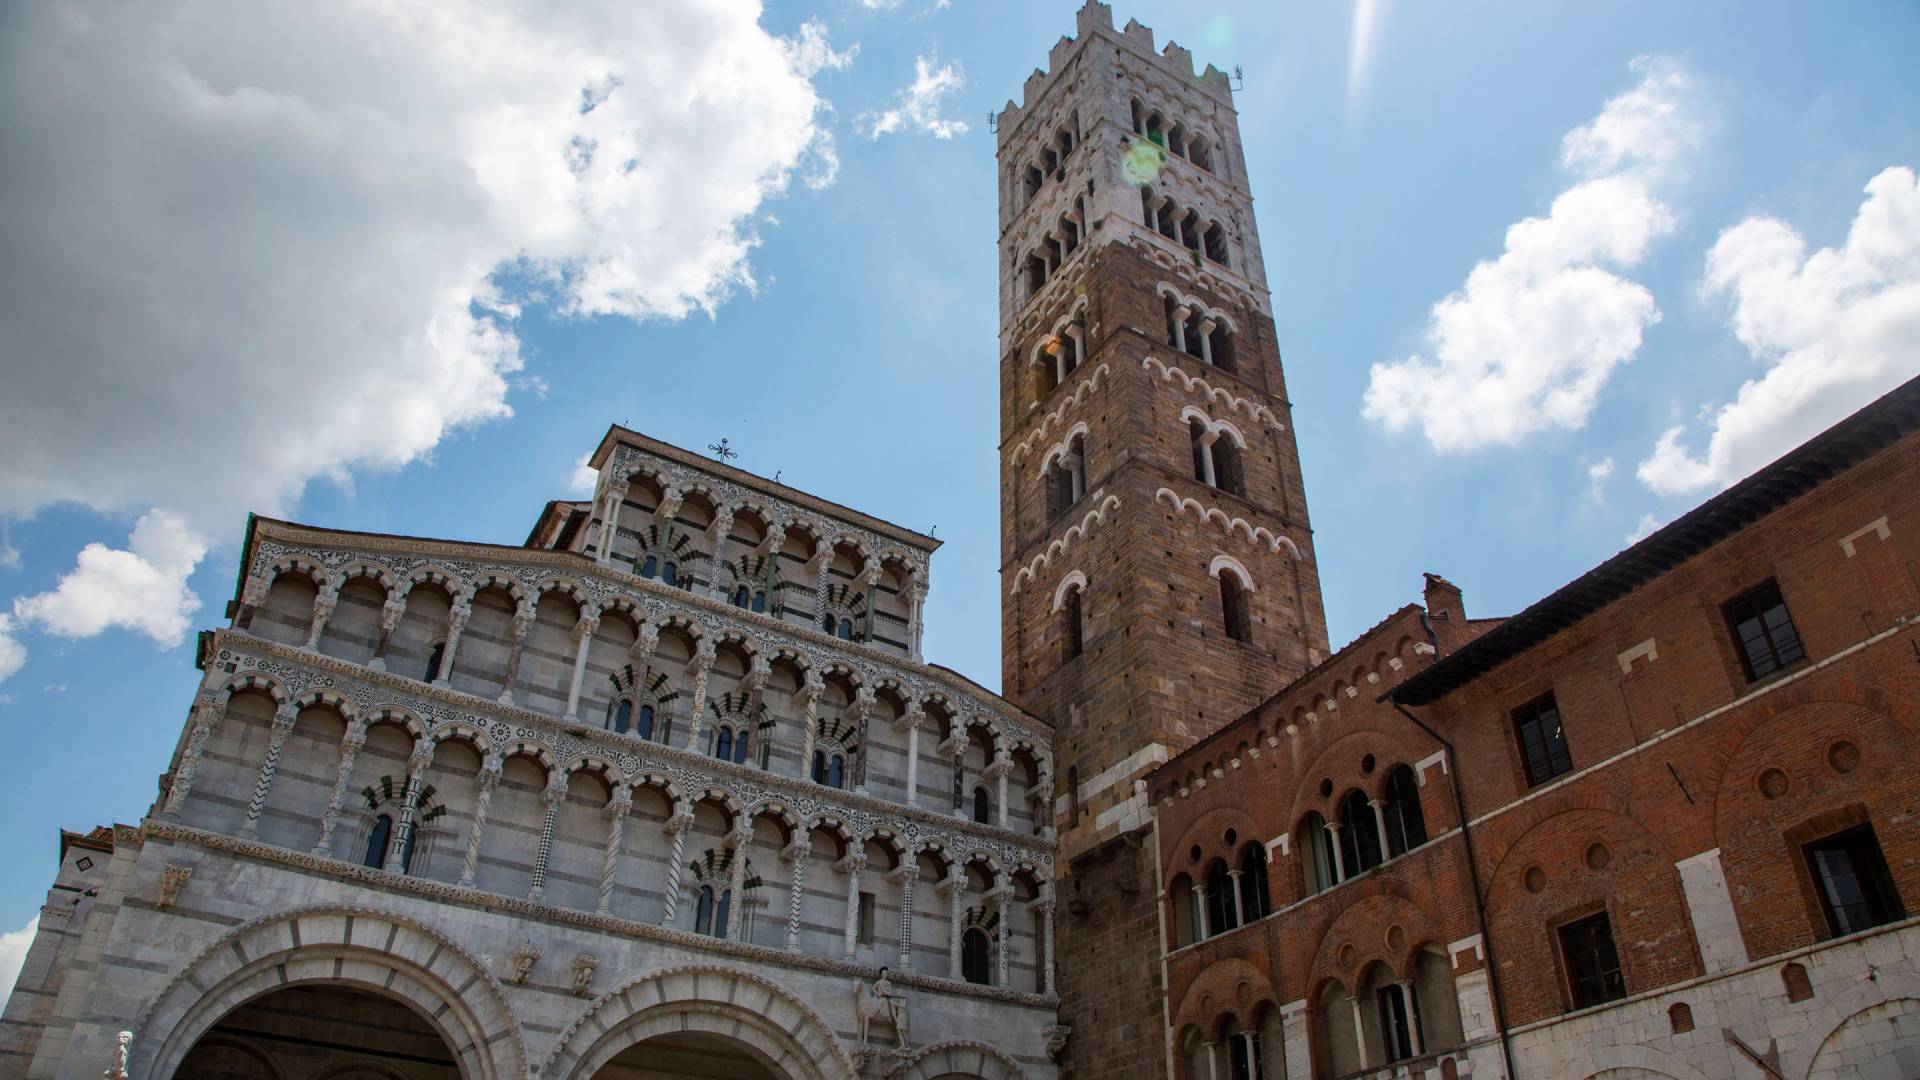 Upward shot of the Lucca Cathedral